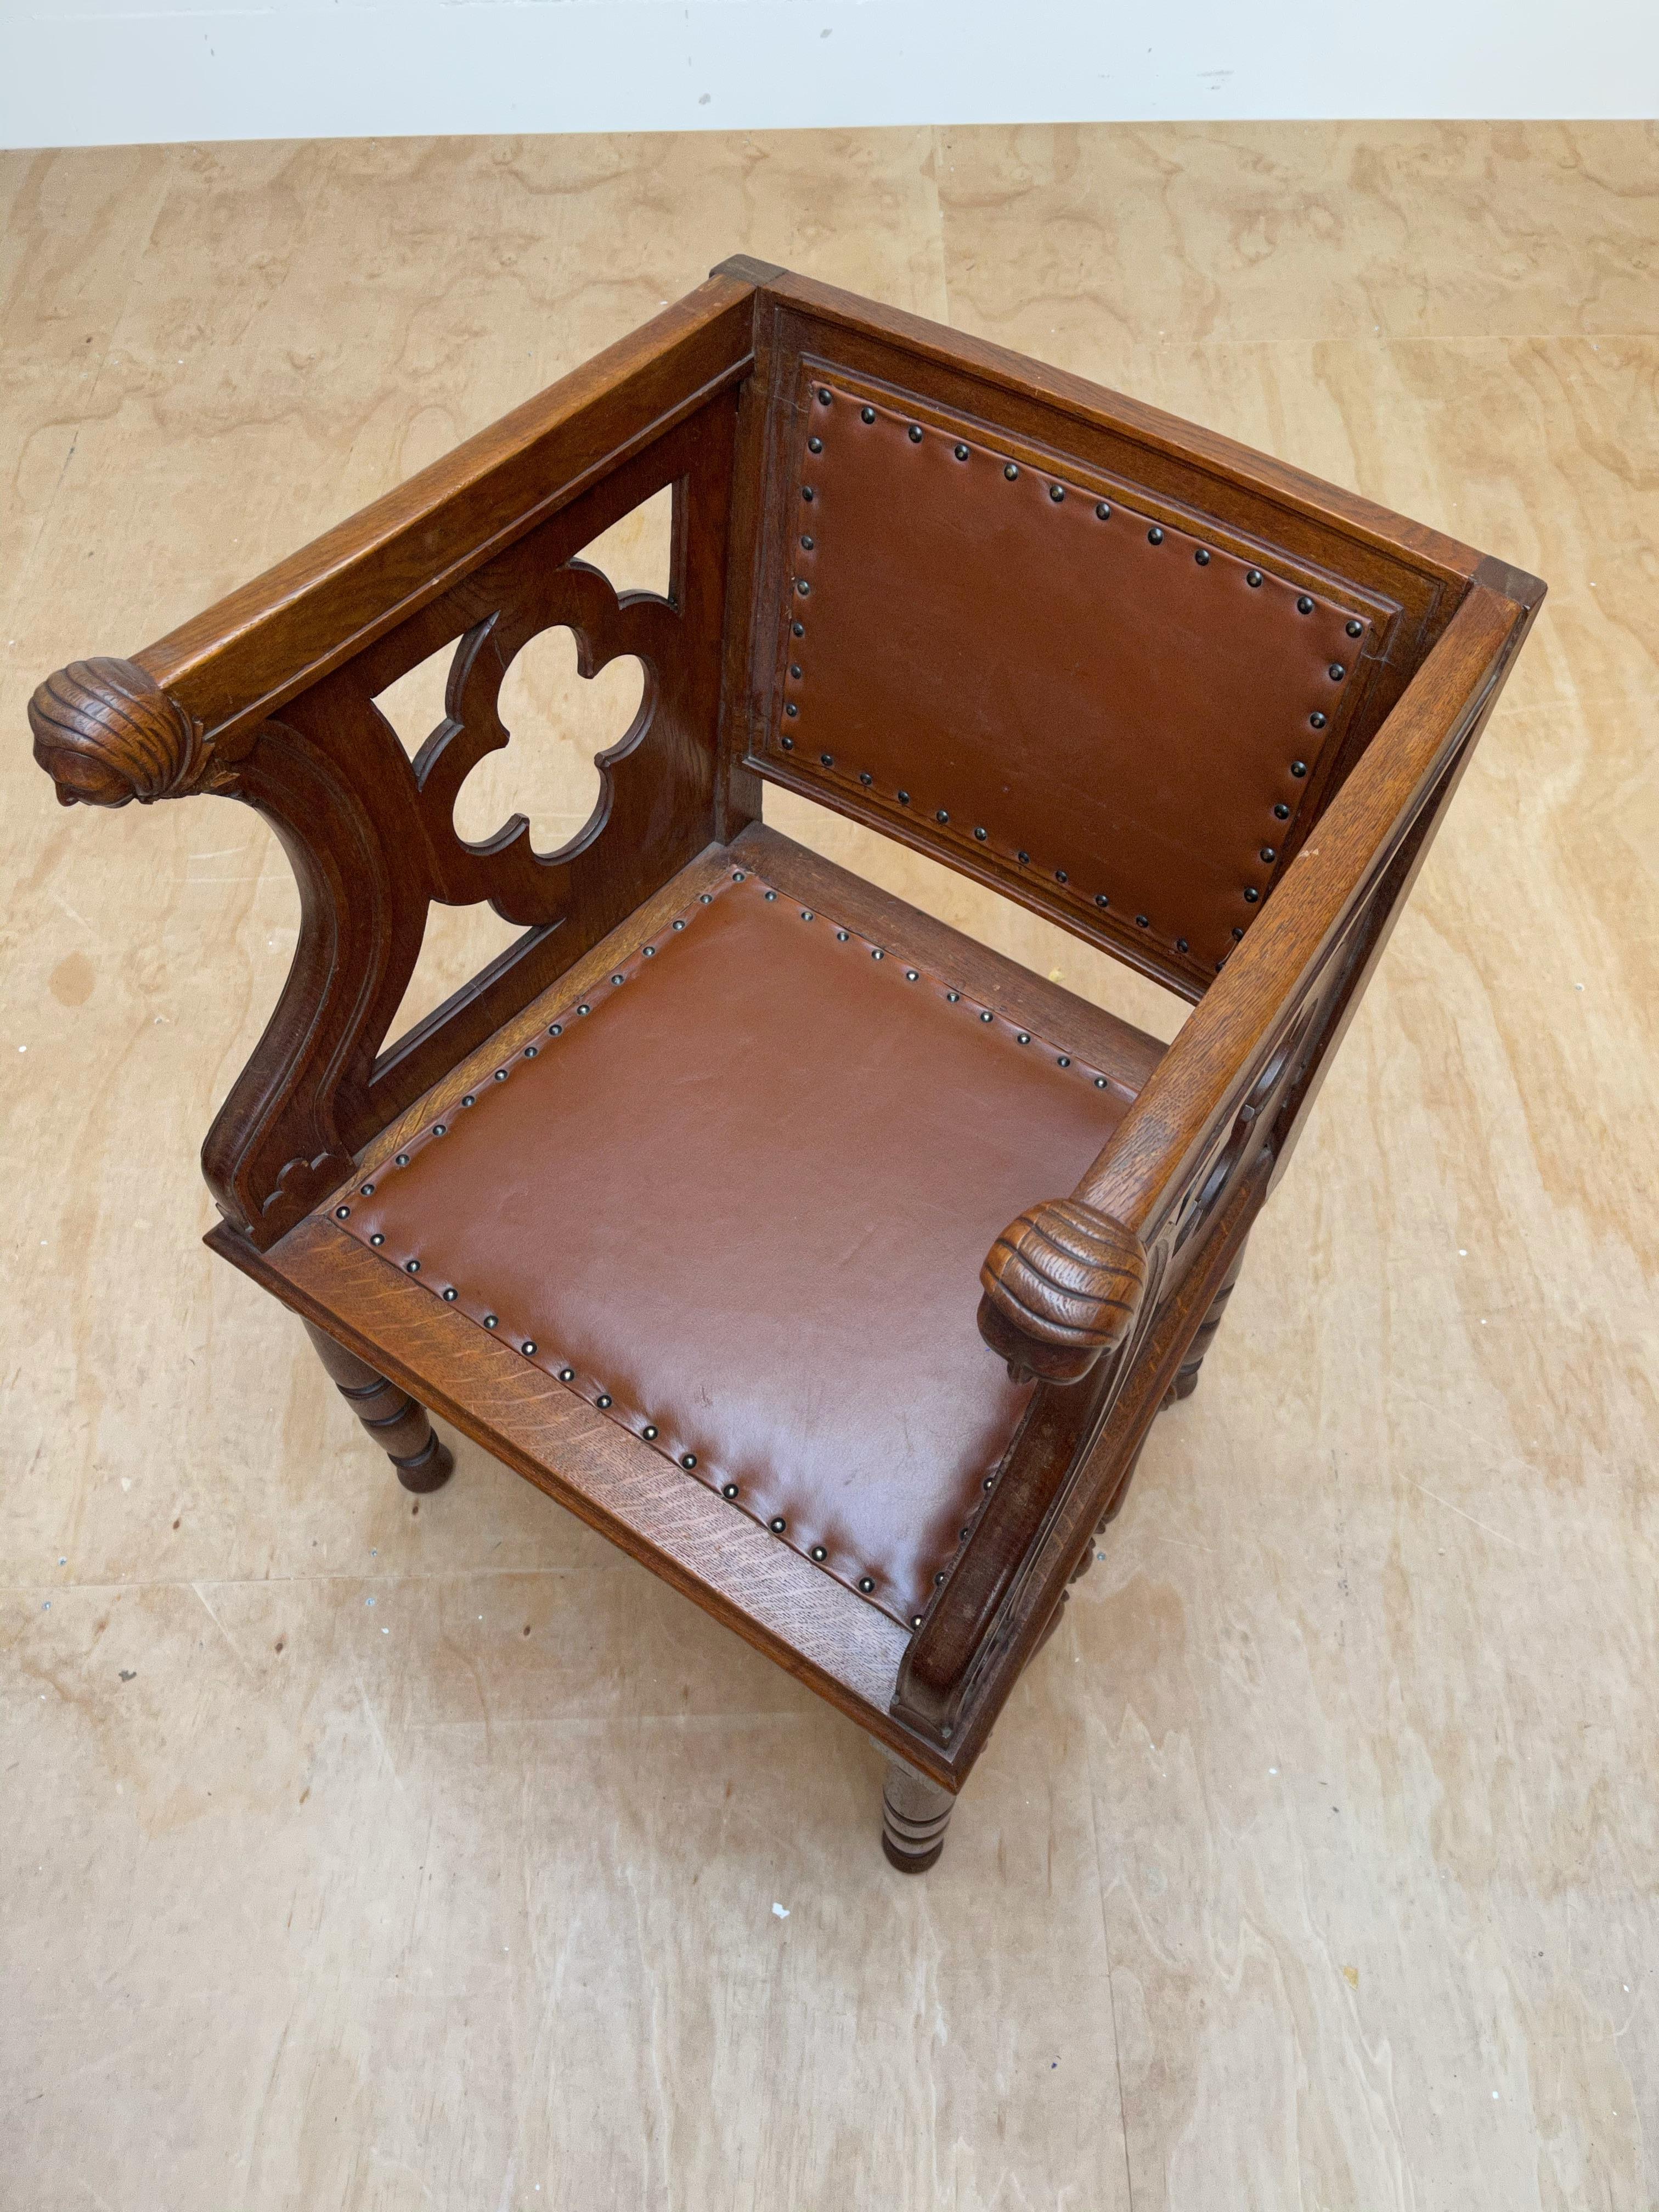 Leather Rare Antique Gothic Revival Oak Armchair Chair w Female Sculptures in Armrests For Sale